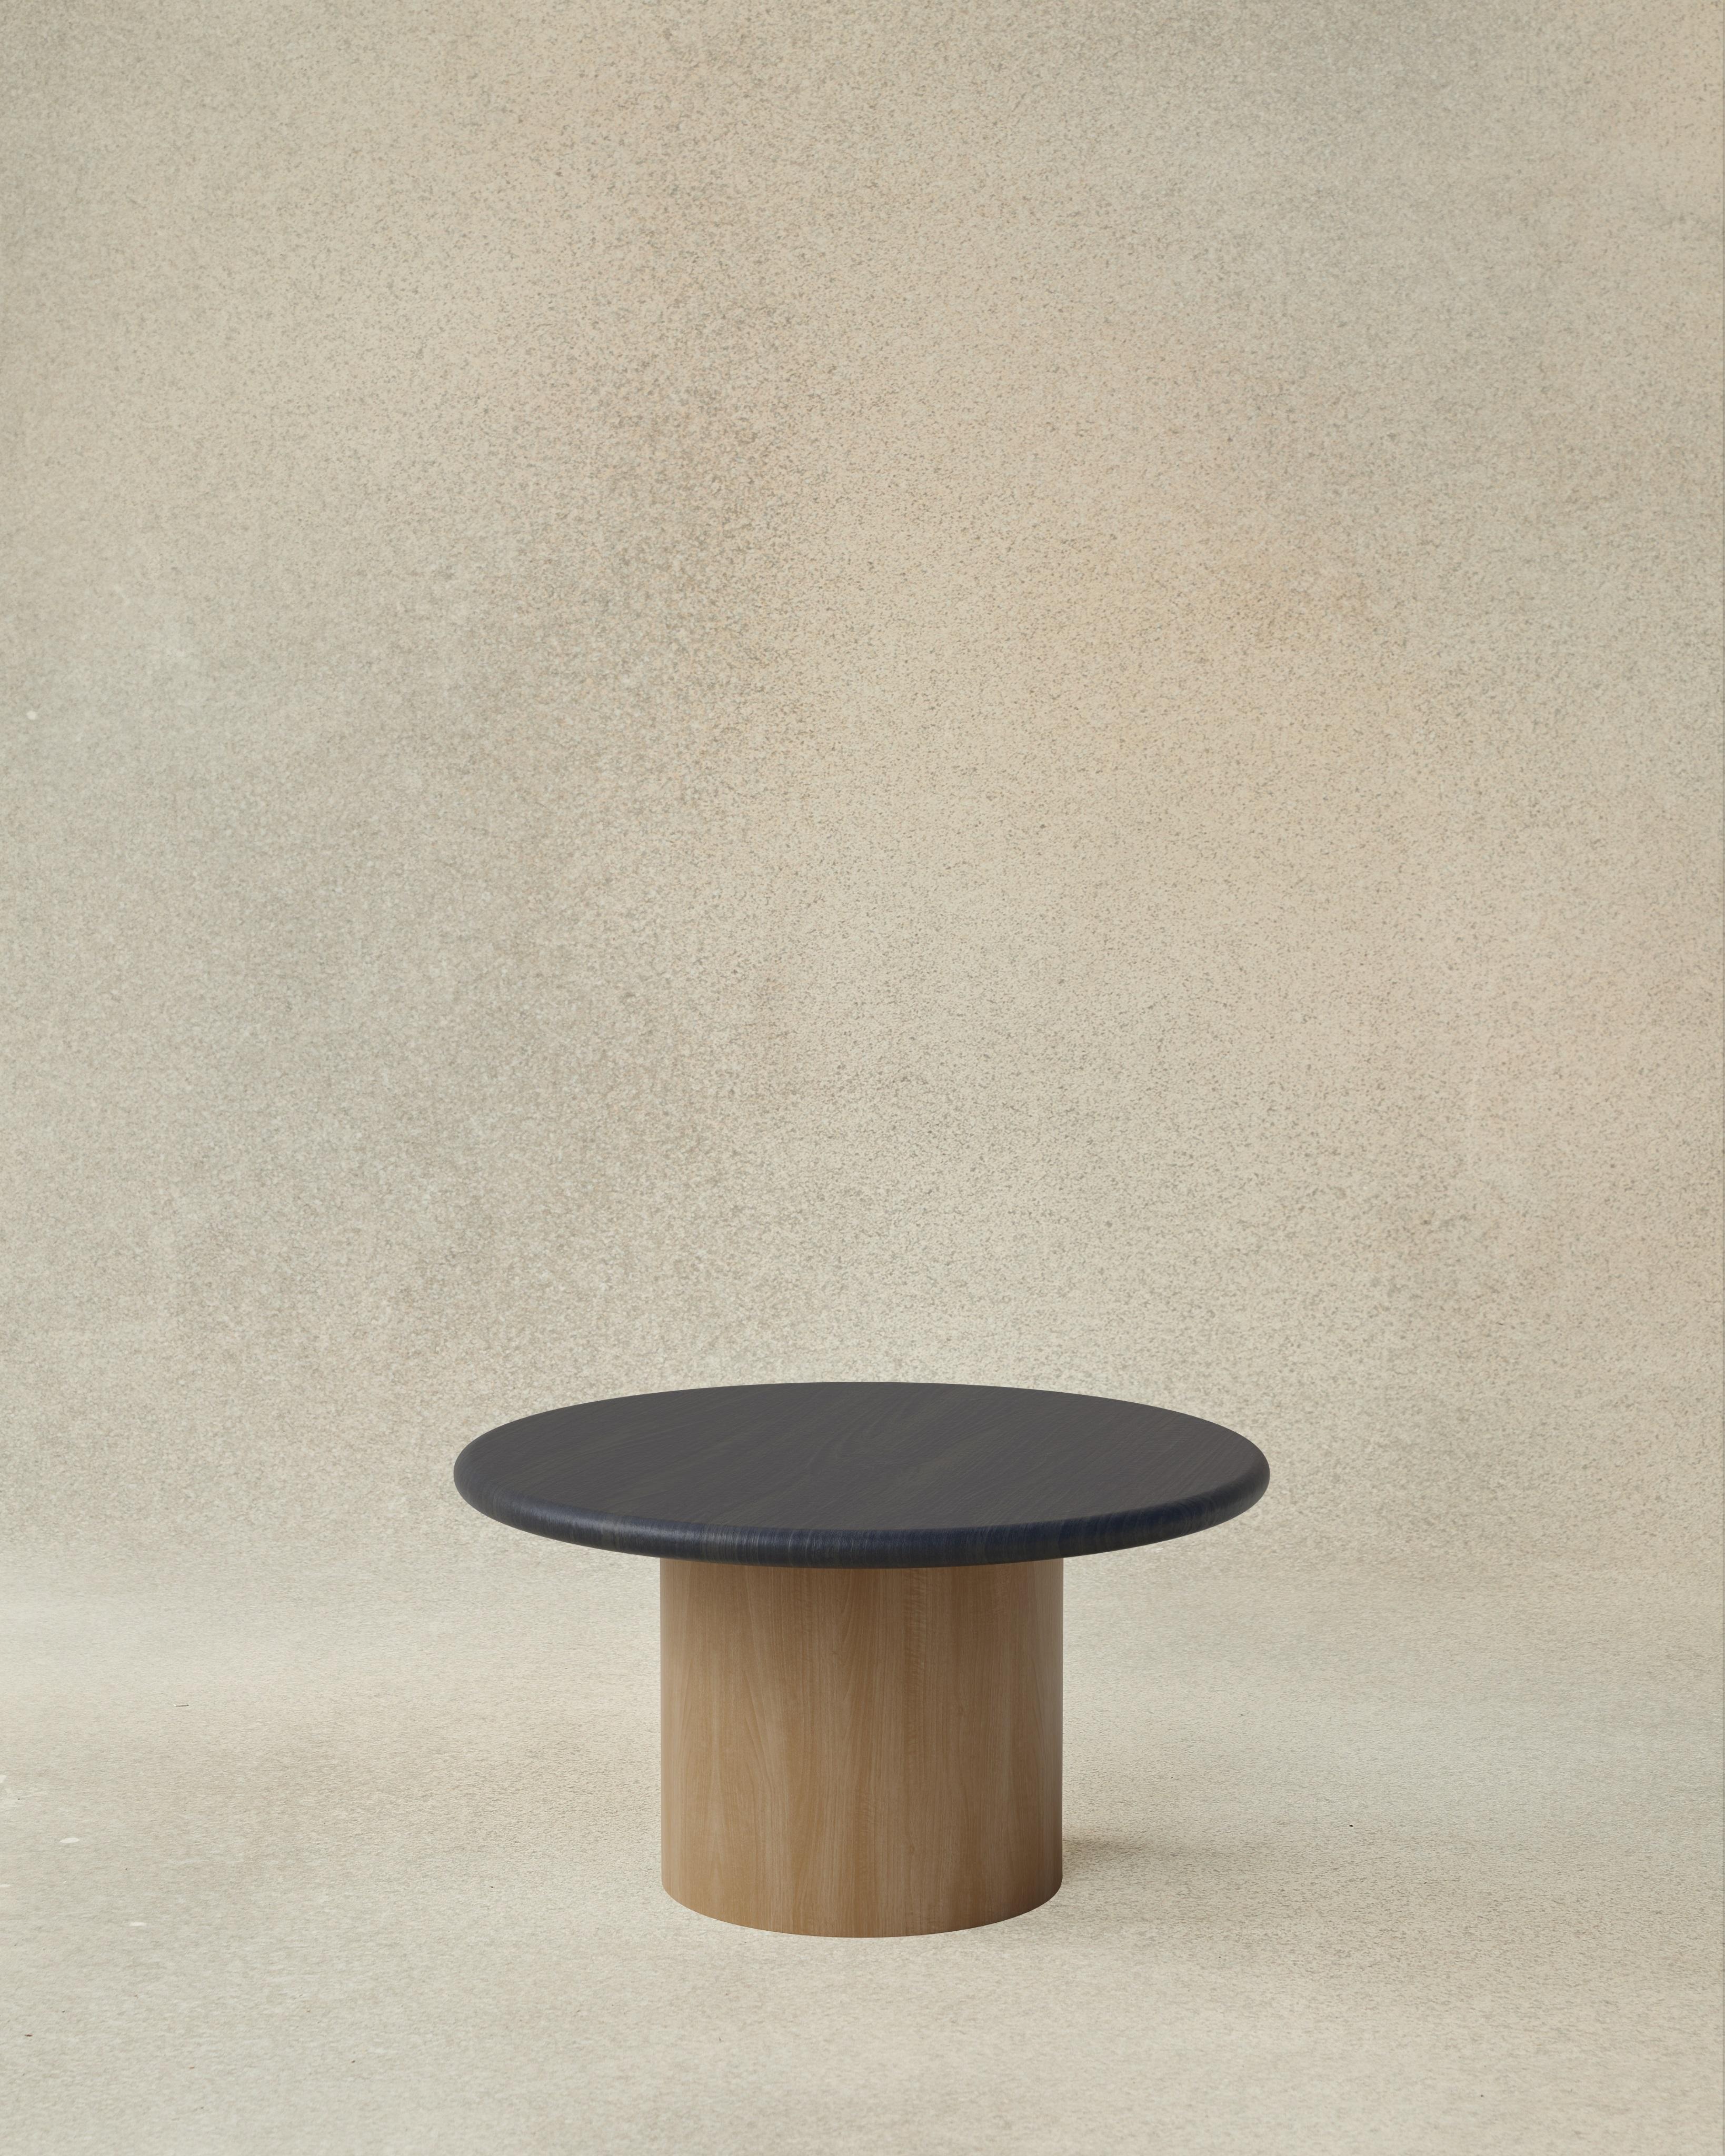 The Raindrop 600 is a mid sized Raindrop, falling within the coffee table set but equally a perfectly sized side table for your home and now available in a range of finishes to suit any interior or style. The raindrops nestle together to form a